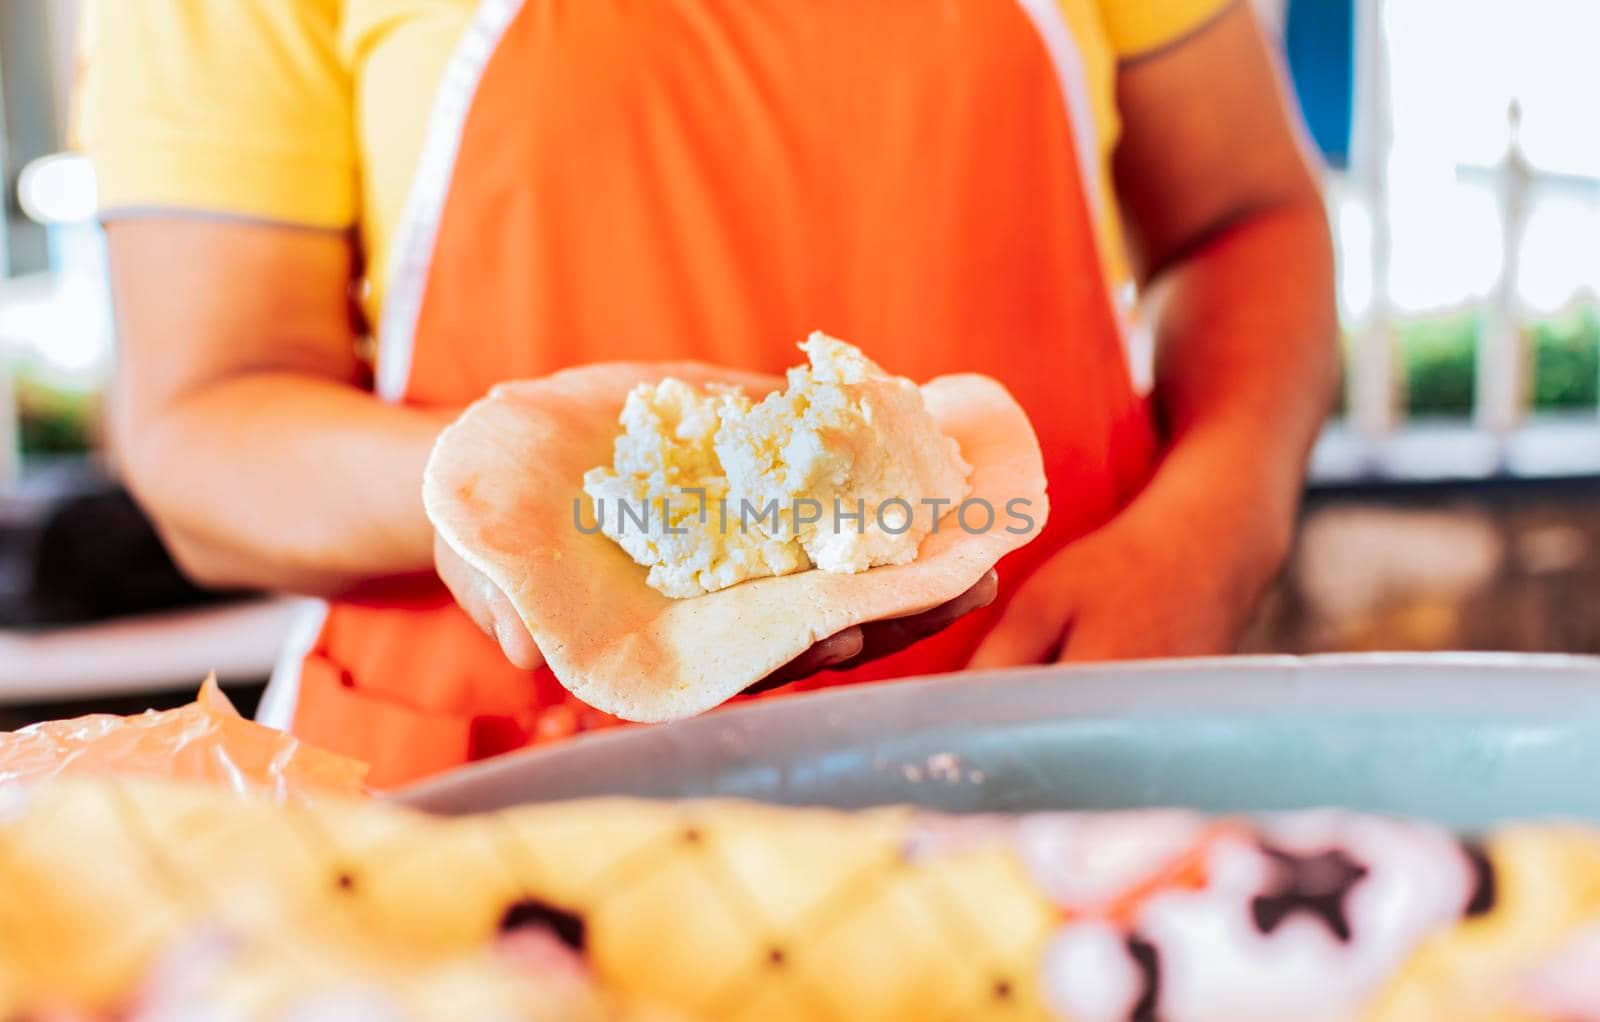 Hands of a vendor showing traditional raw pupusa. Elaboration of traditional pupusas, elaboration of the dough for traditional Nicaraguan pupusas by isaiphoto